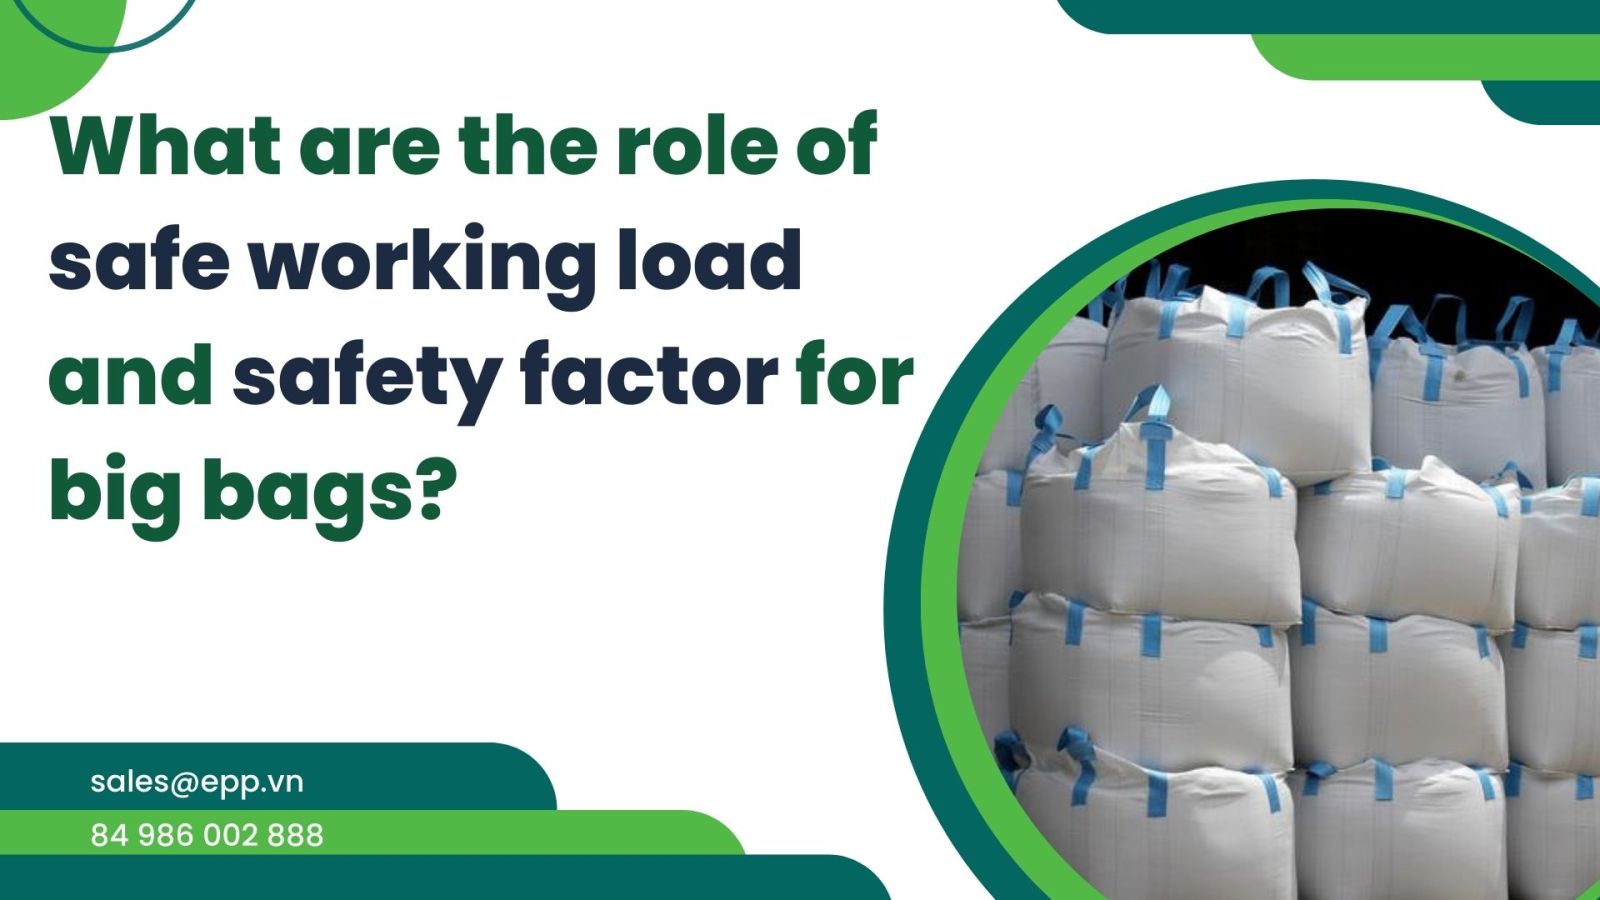 What-are-the-role-of-safe-working-load-and-safety-factor-for-big-bags.jpg